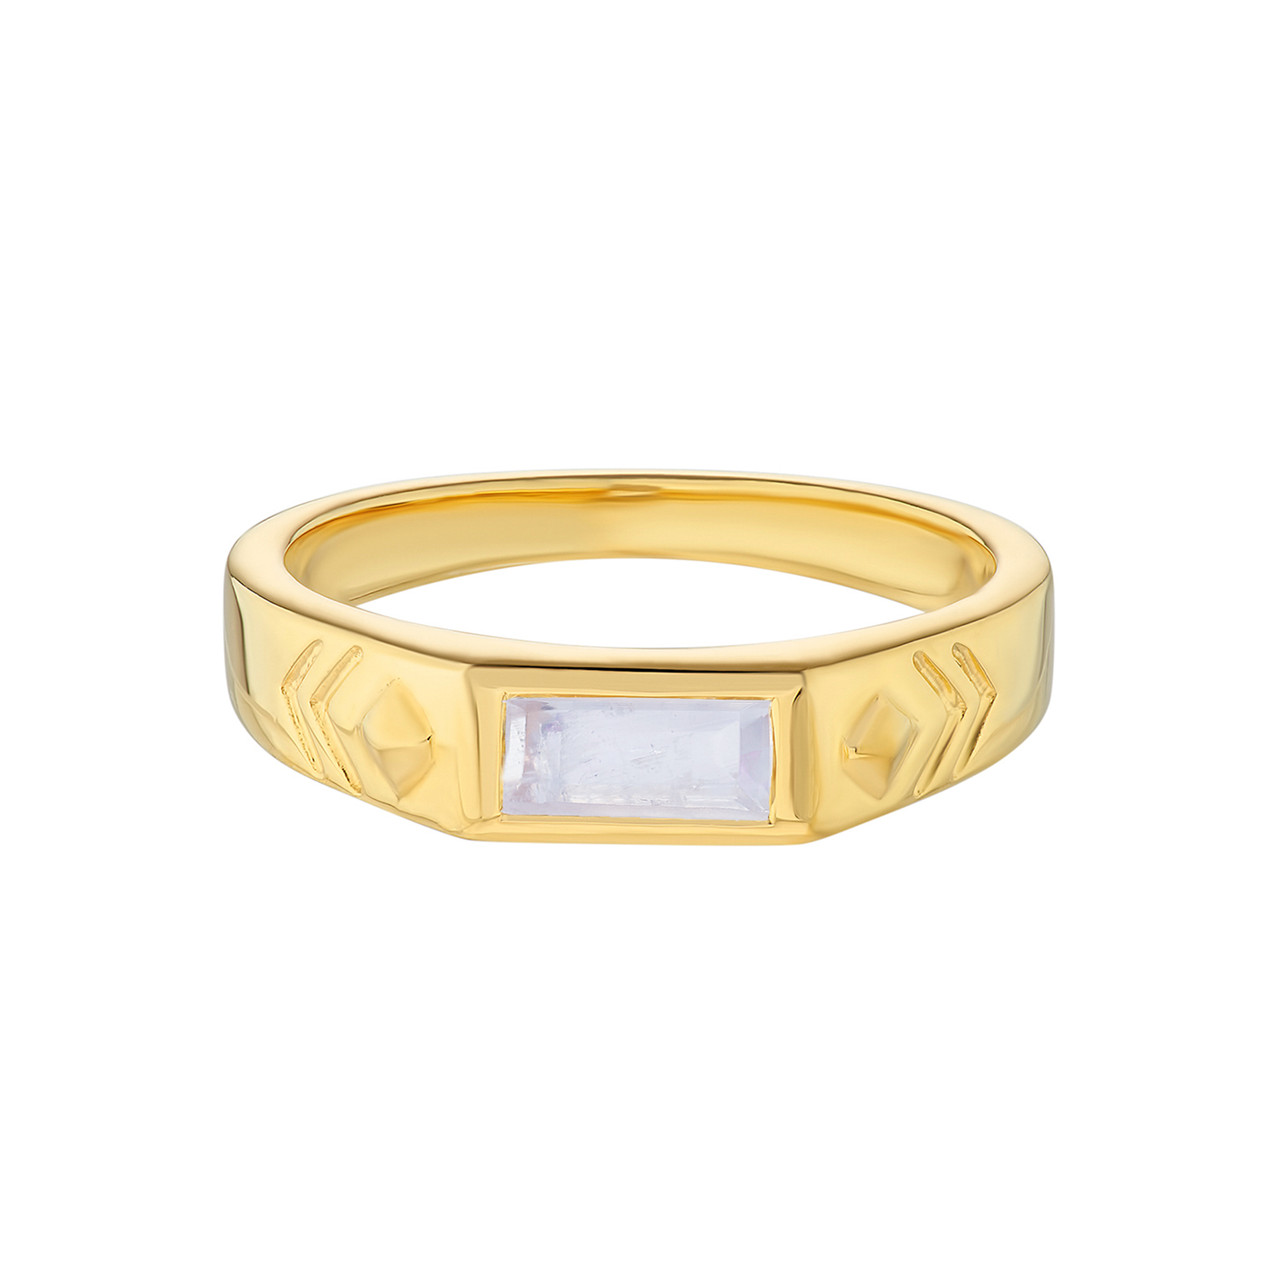 AURA Baguette Gem Gold Plated Ring, TRIBE, Tomfoolery london